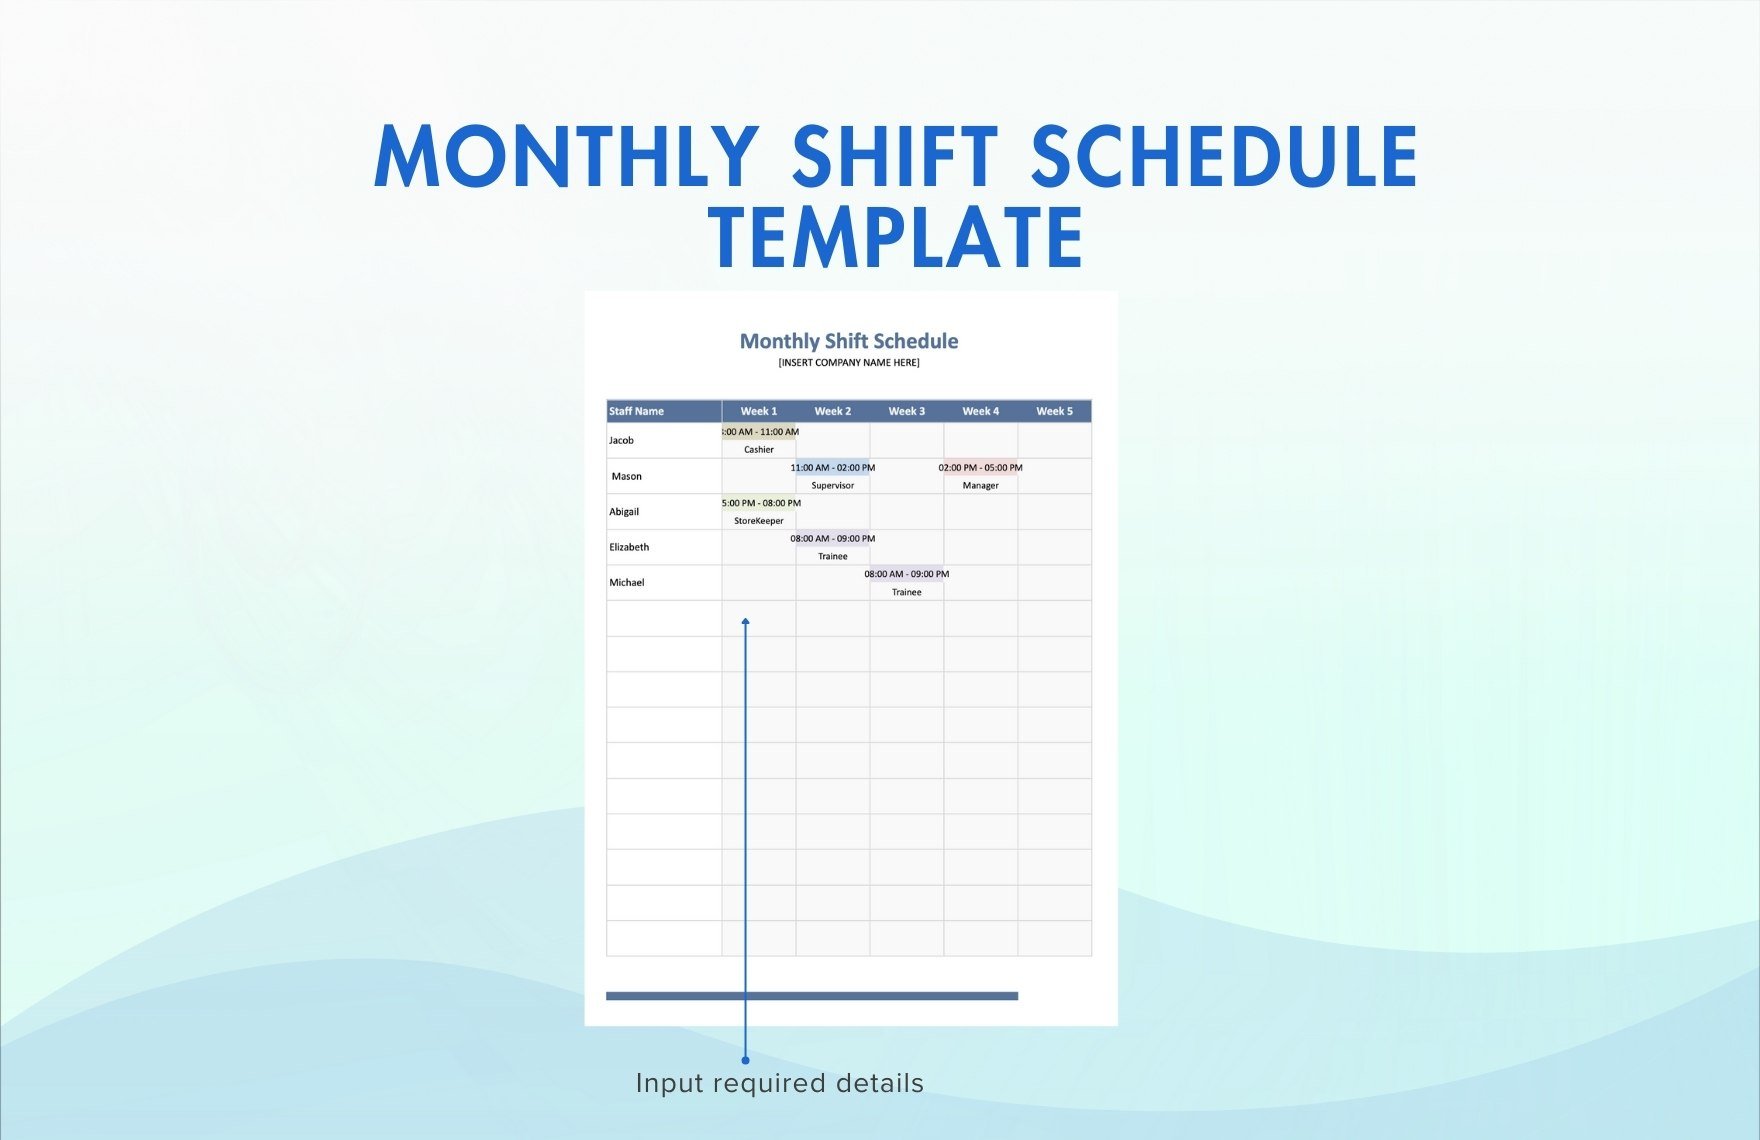 Monthly Shift Schedule Template